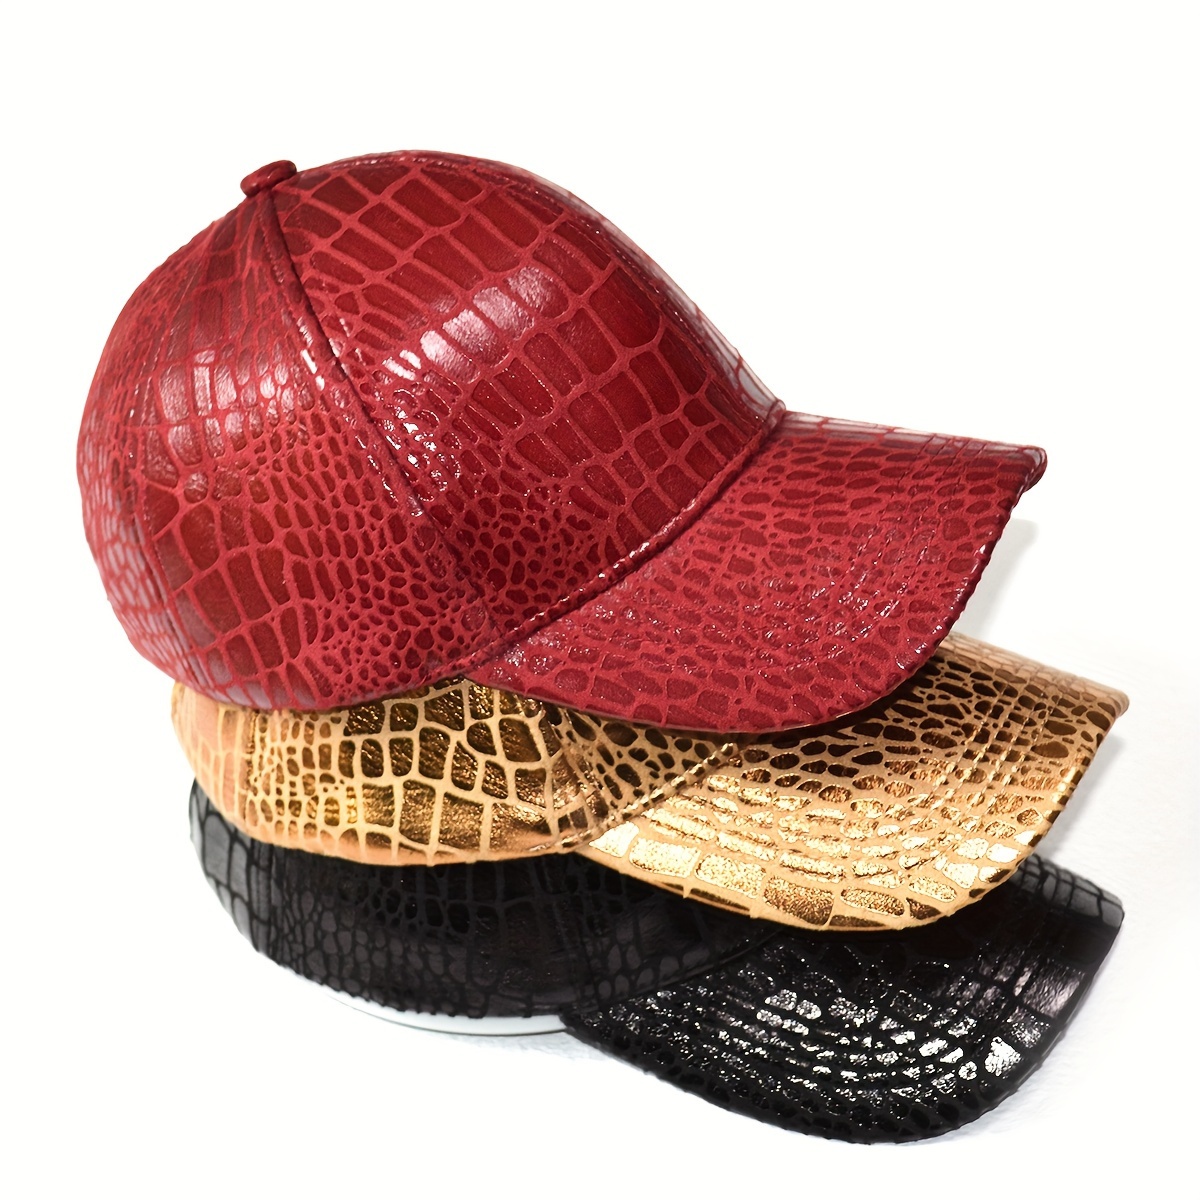 

Classic Crocodile Embossed Pu Leather Baseball Cap - Fashionable Solid Color Sports Cap With Adjustable Lightweight Design For Women And Men